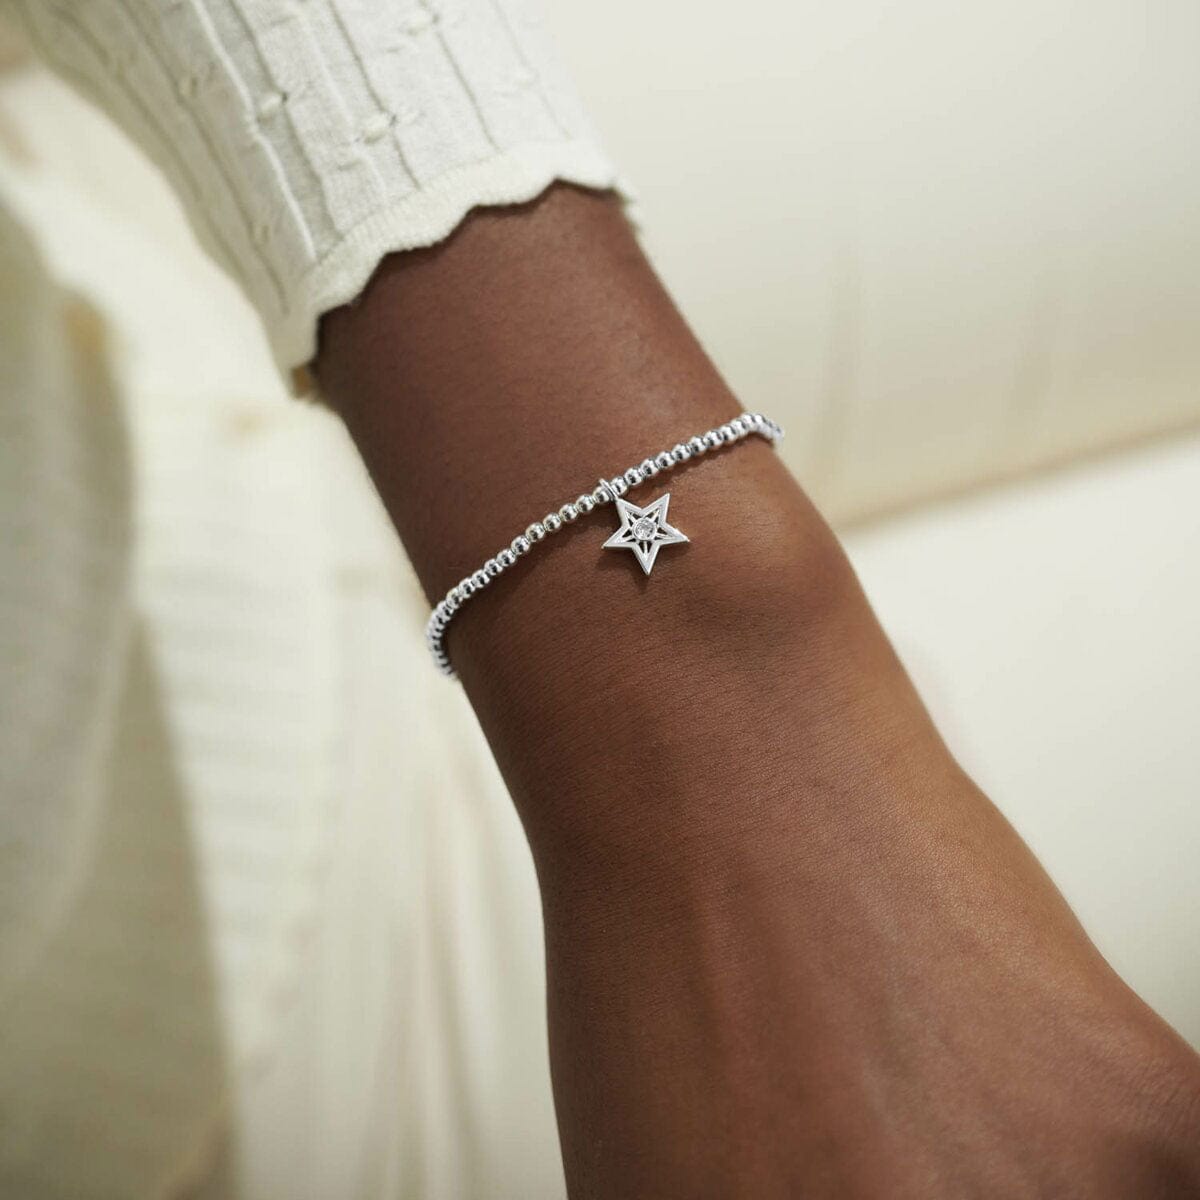 Joma Jewellery Bracelets Joma Jewellery Bracelet - A little The Best Is Yet To Come